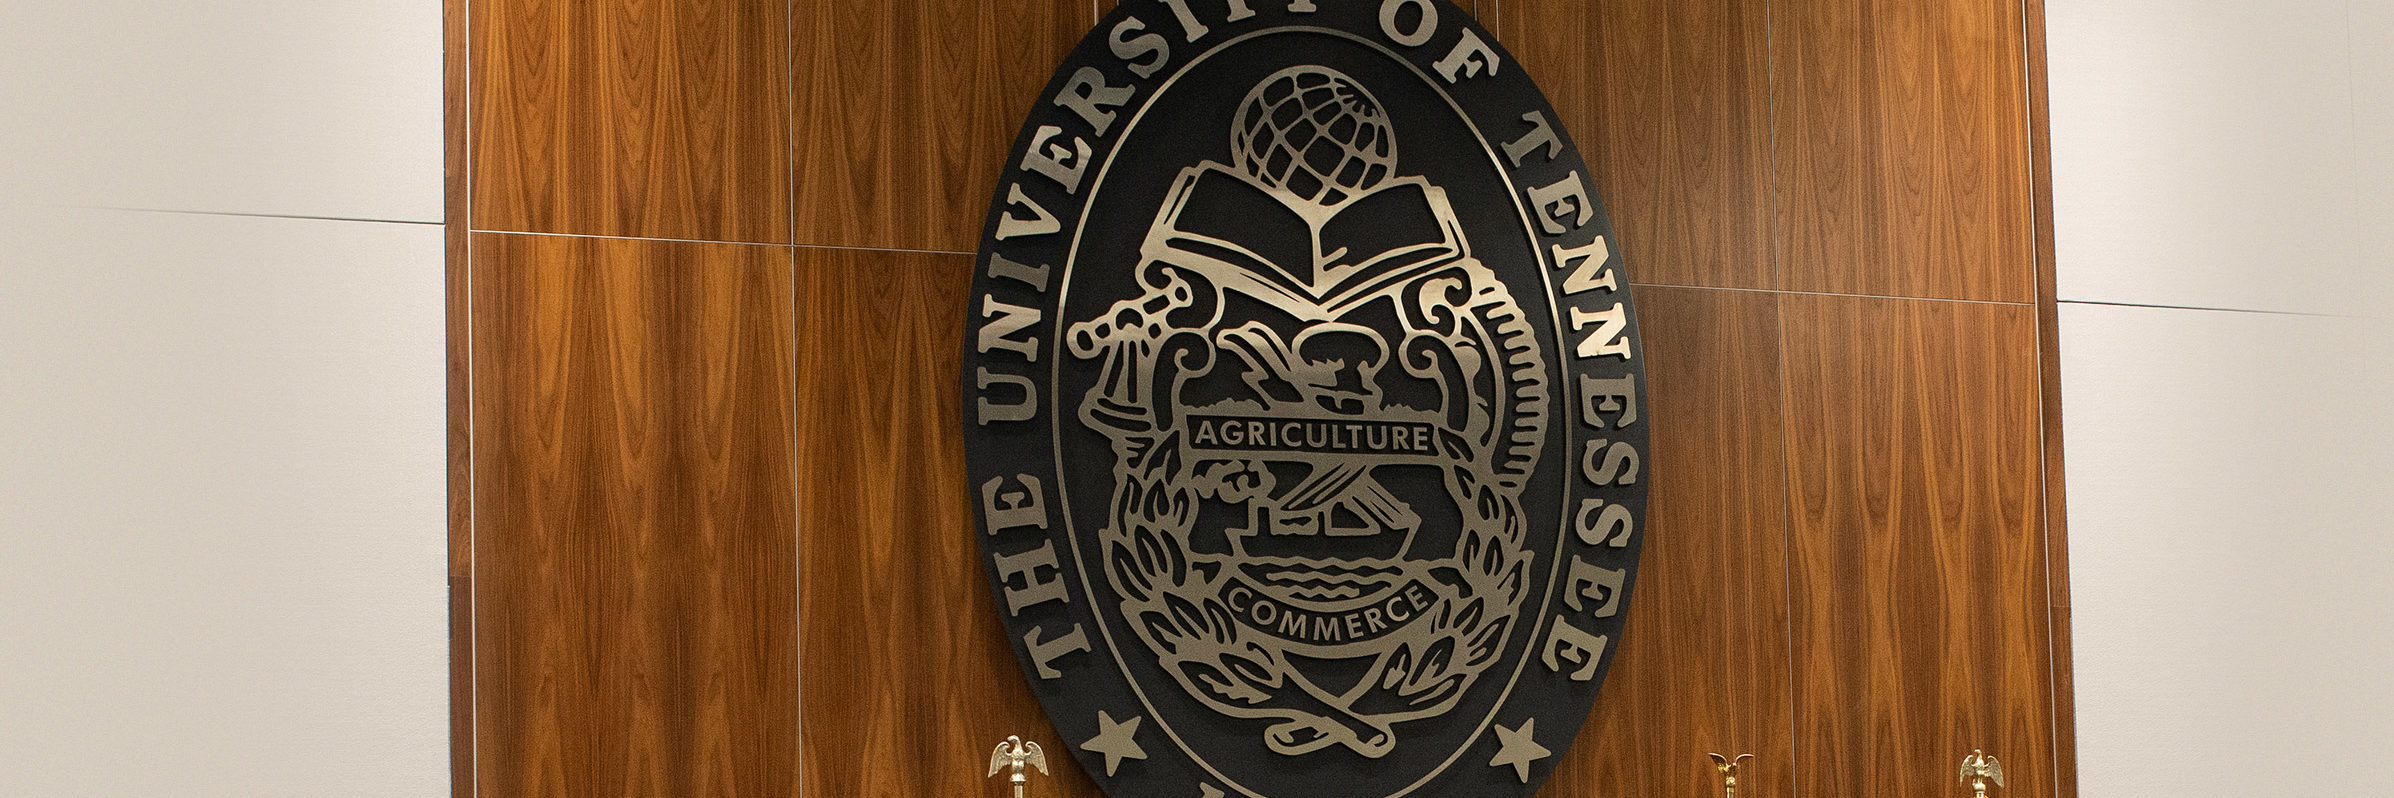 The University of Tennessee seal on the student union ballroom at UTK